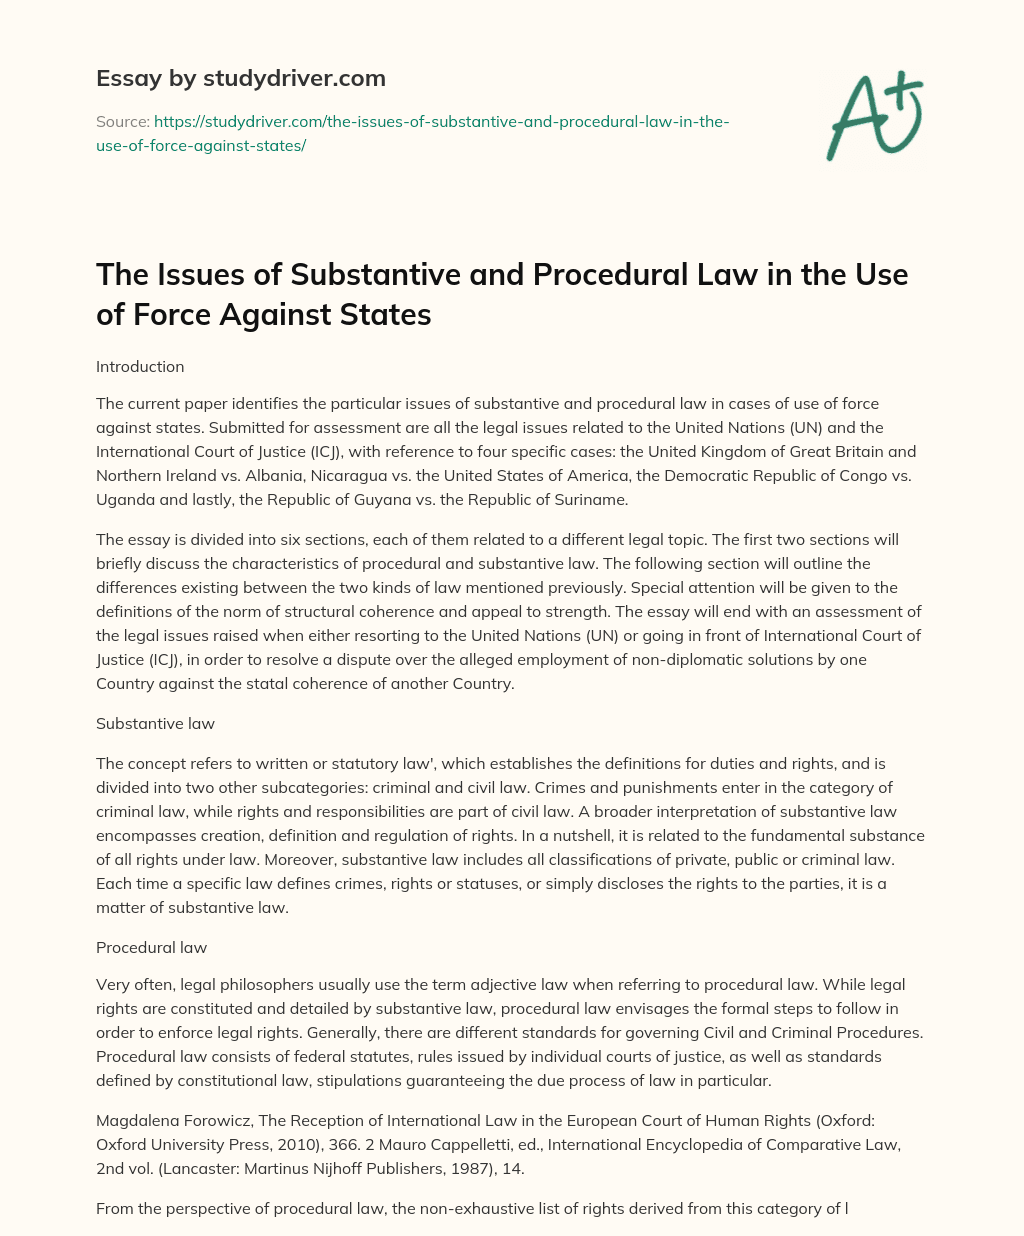 The Issues of Substantive and Procedural Law in the Use of Force against States essay